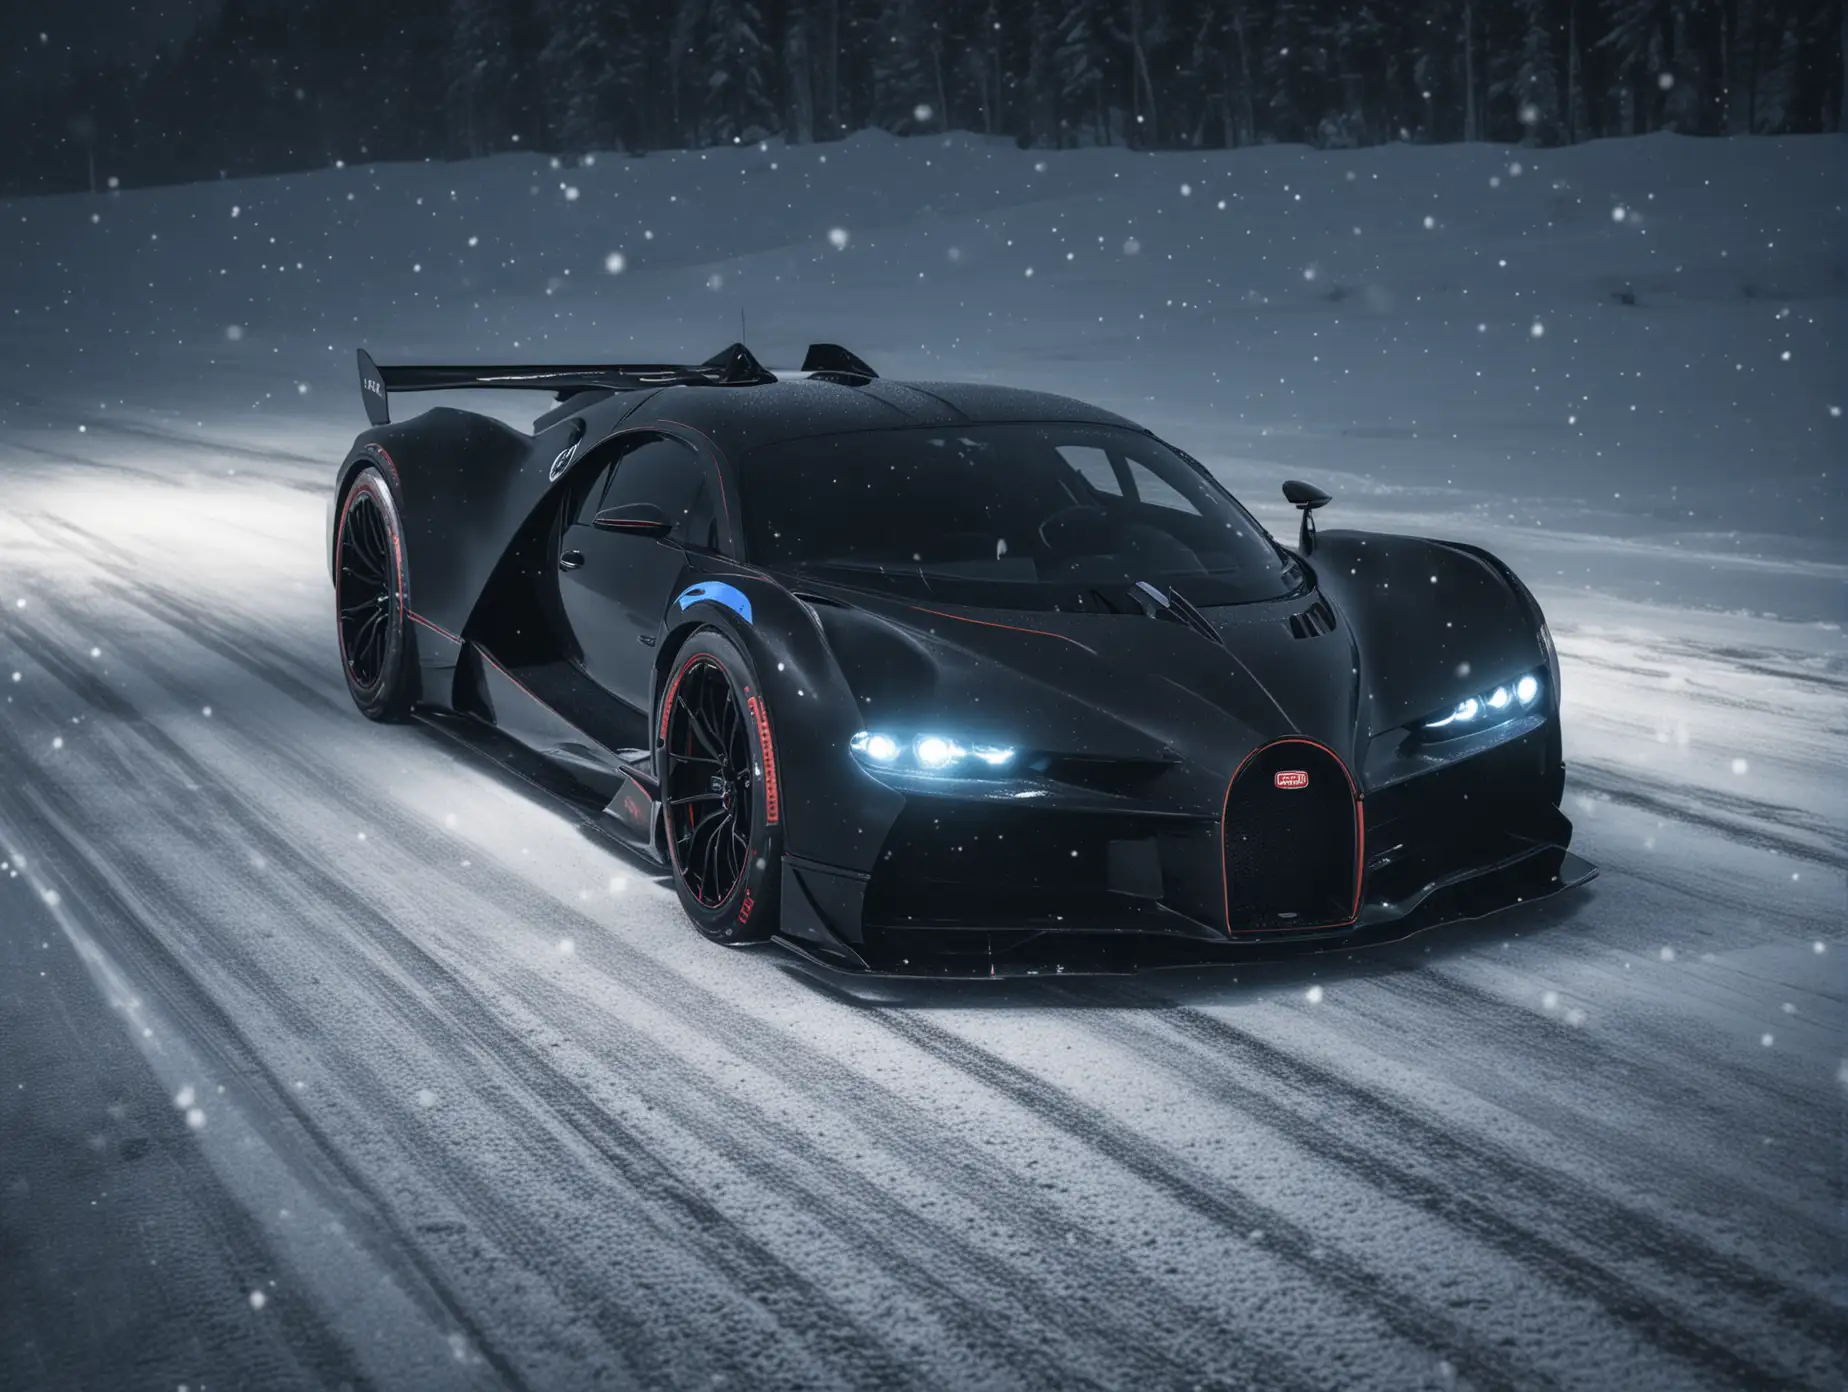 Night-Drifting-Bugatti-Bolide-Racing-on-SnowCovered-Road-in-Dark-Ambiance